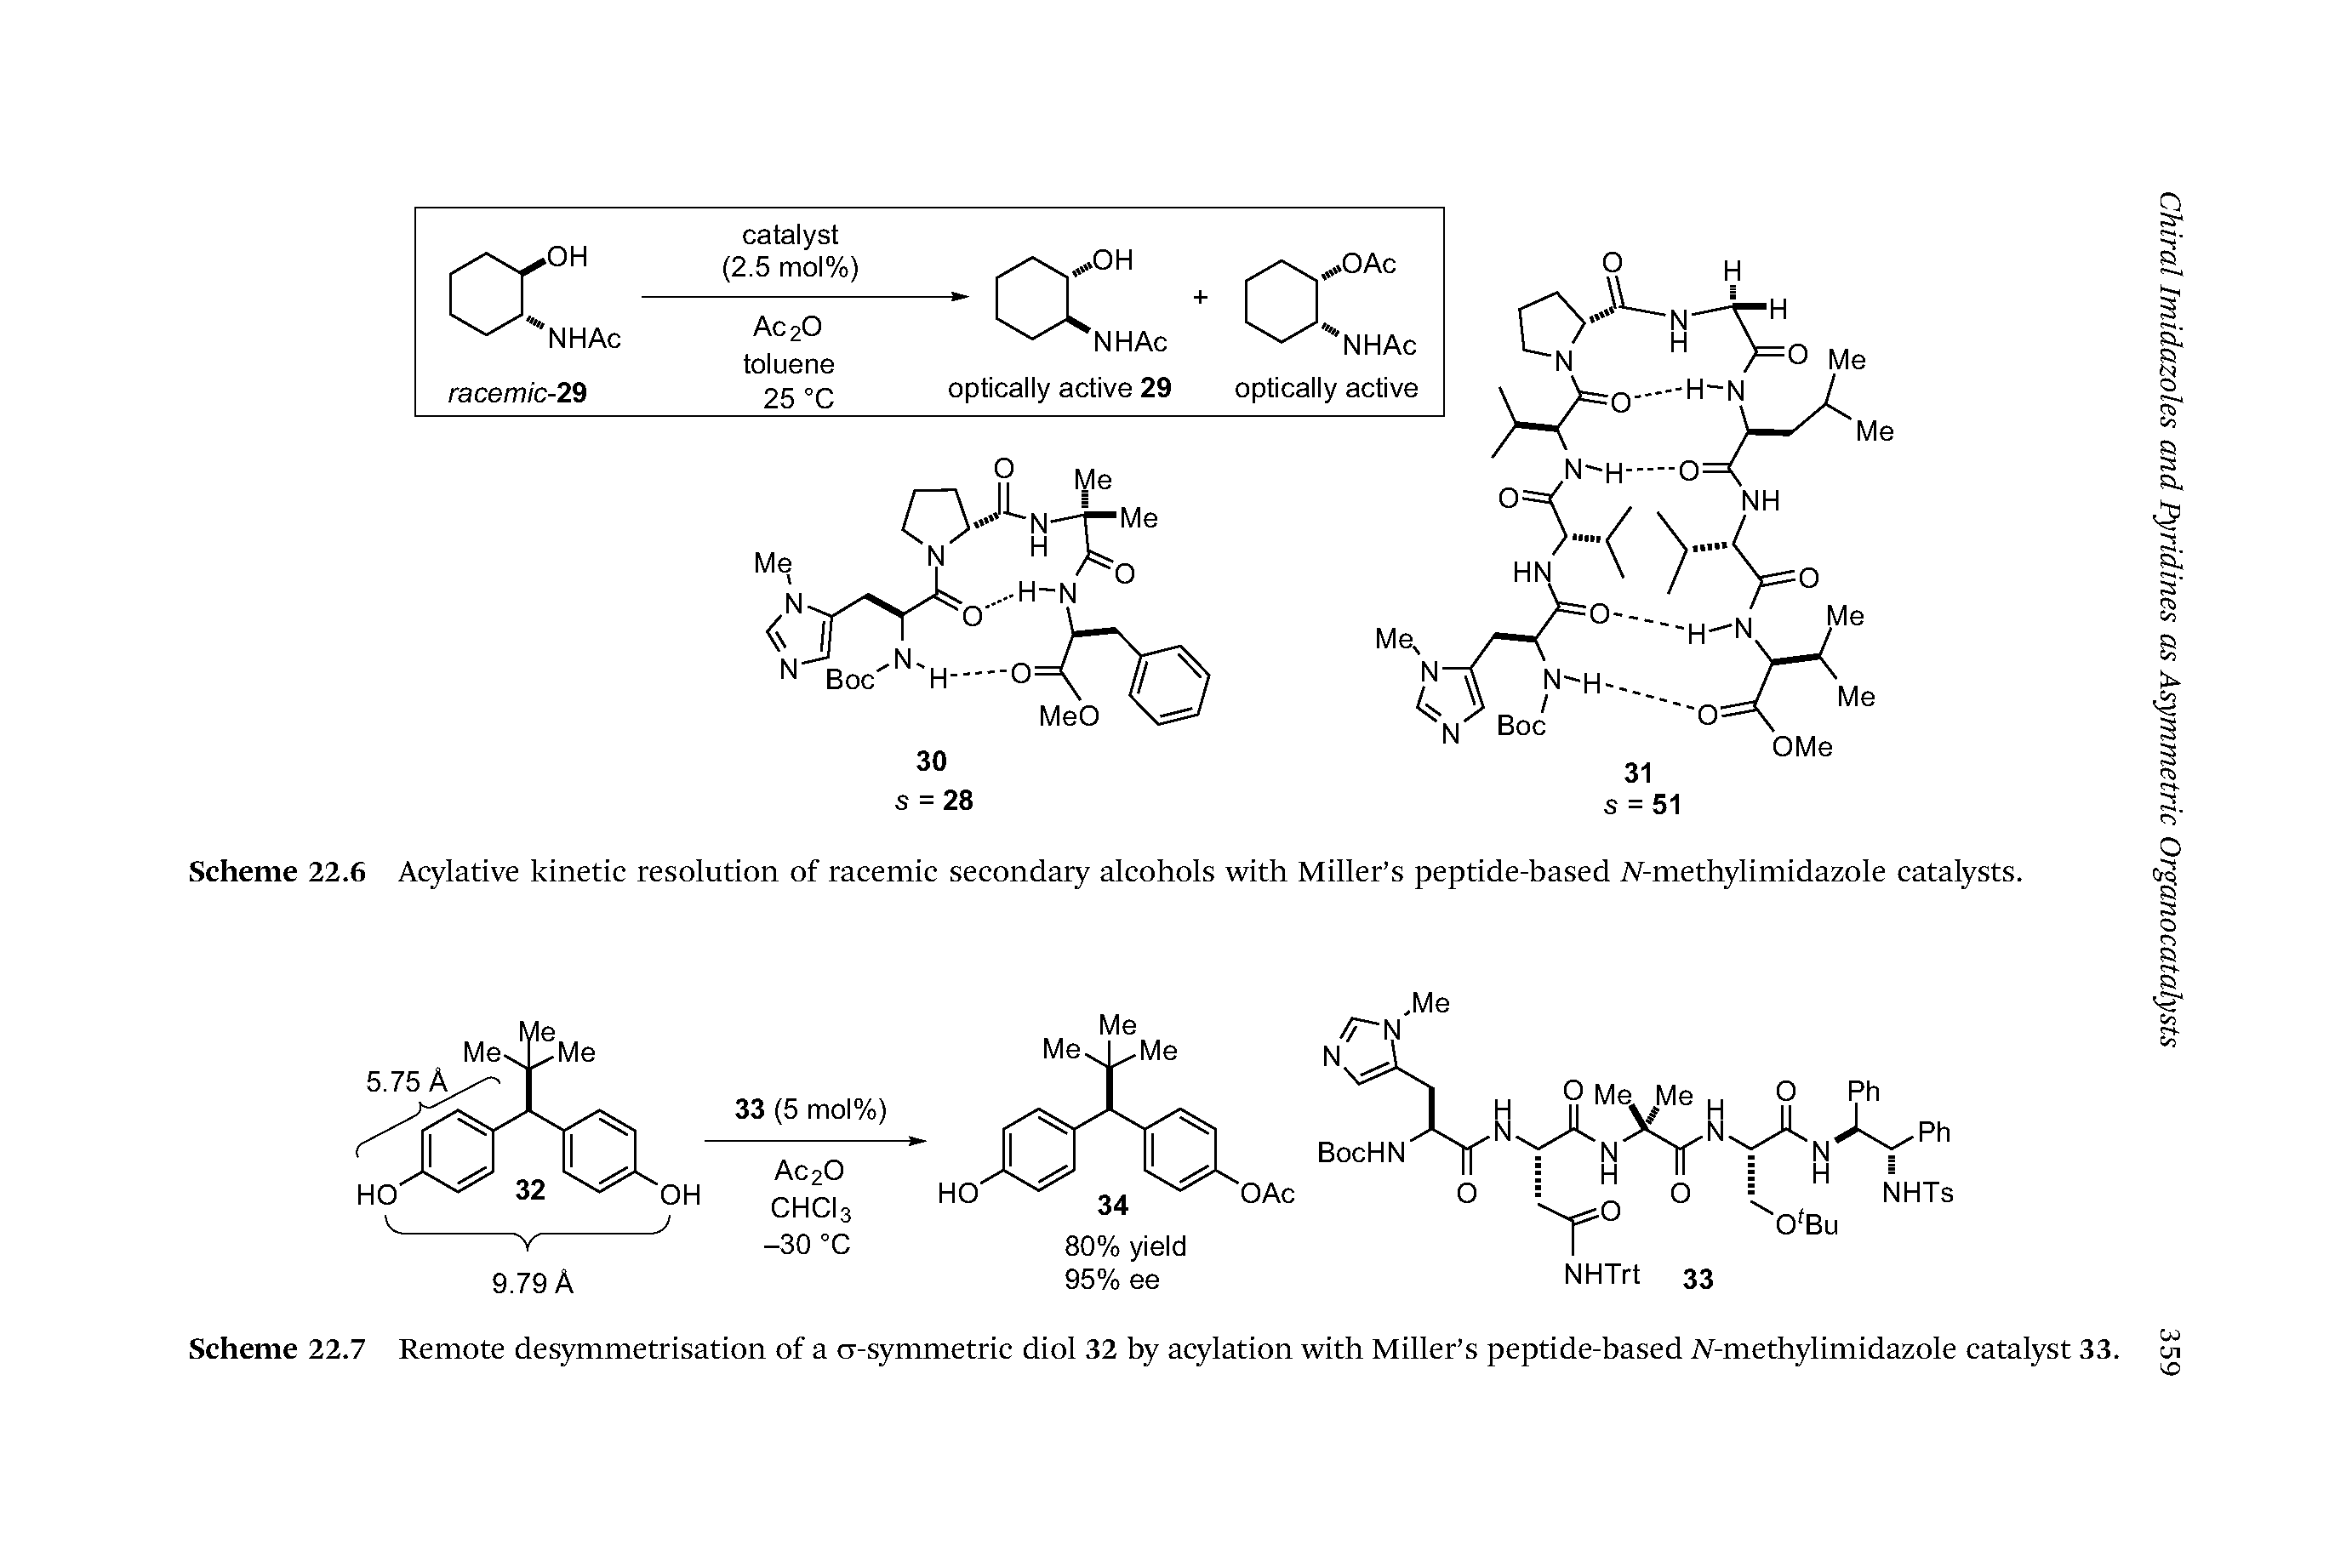 Scheme 22.6 Acylative kinetic resolution of racemic secondary alcohols with Miller s peptide-based iV-methylimidazole catalysts.